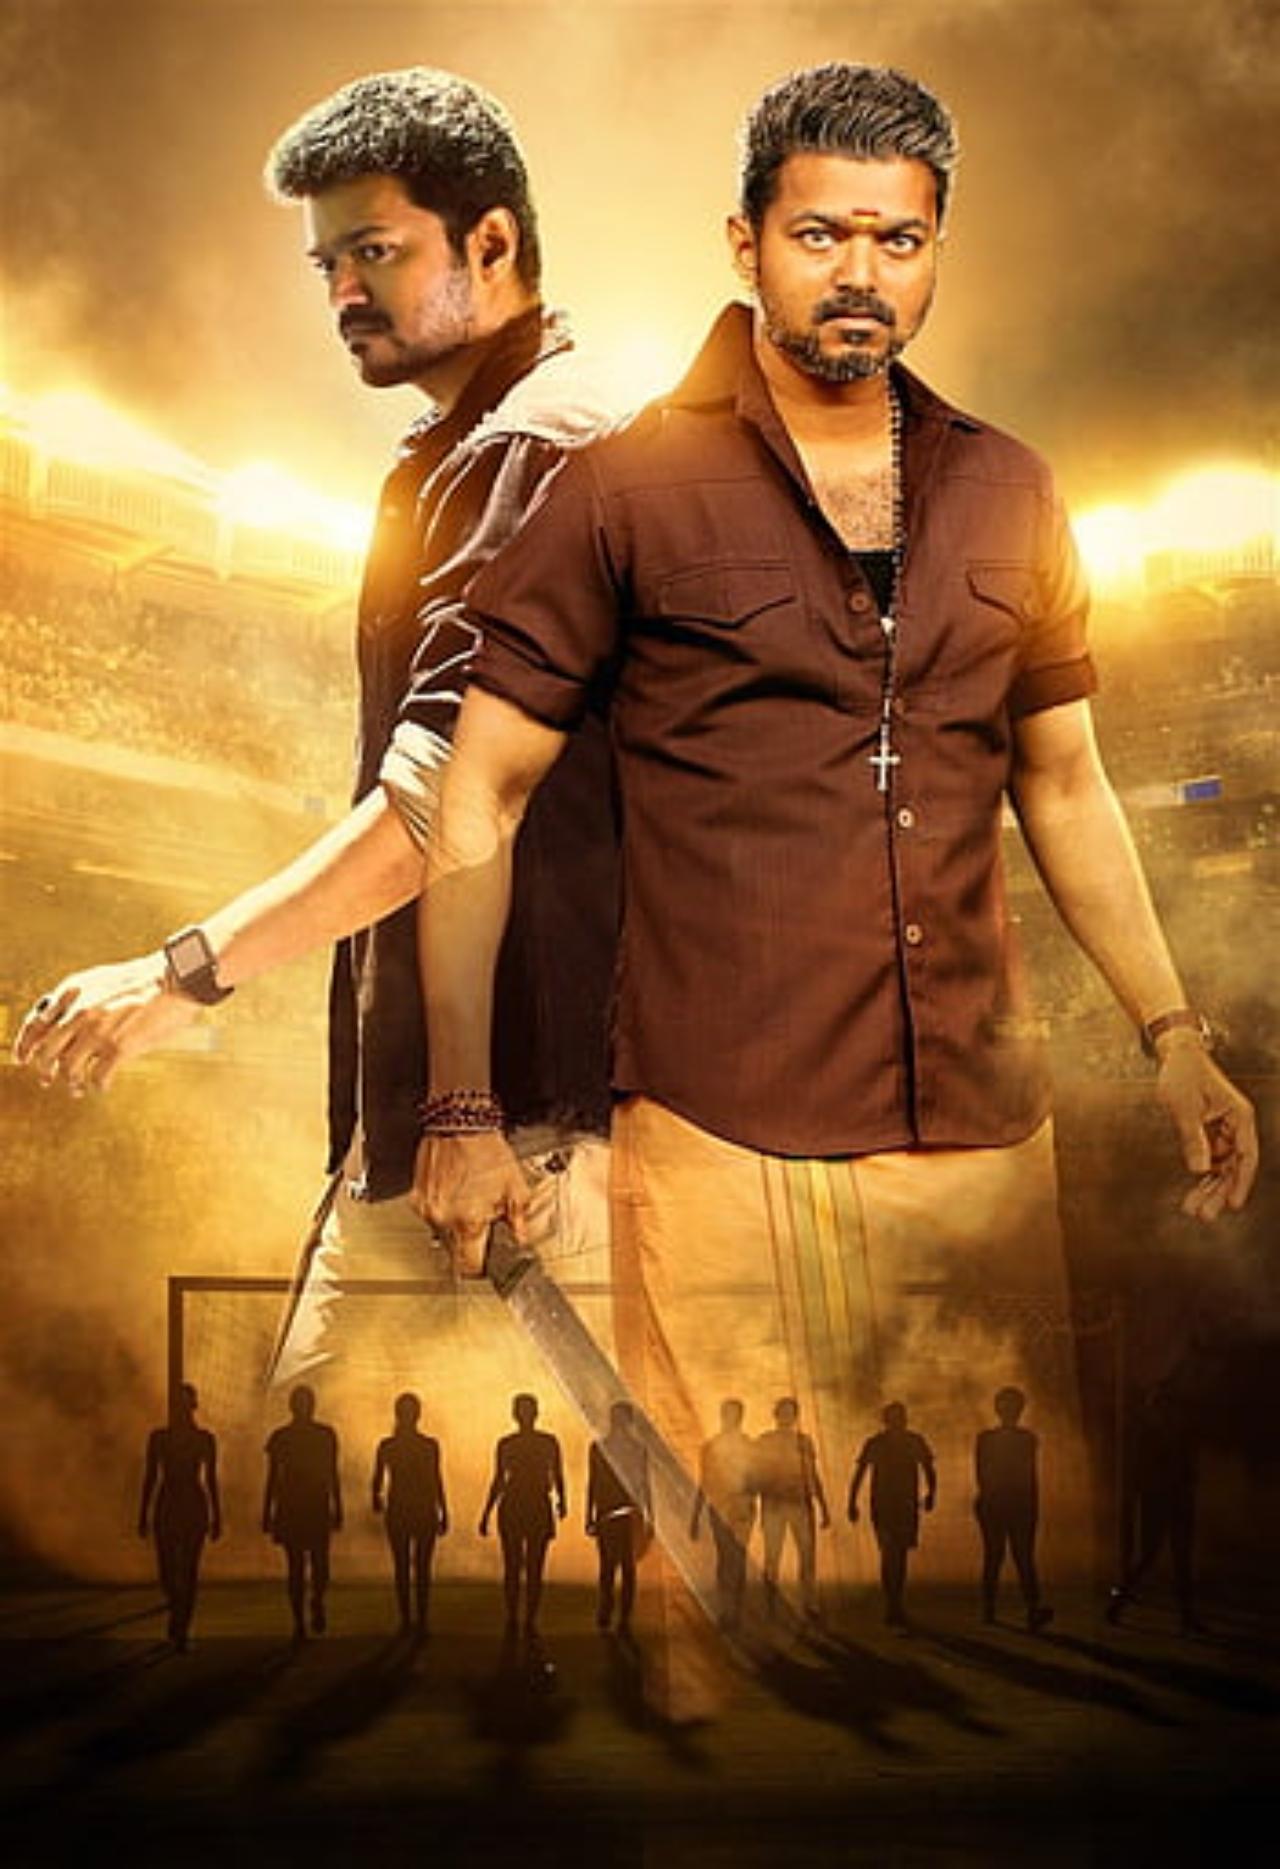 For his third collaboration with Vijay and fourtth directorial, Atlee went for a sports drama cum gangster drama. Like Mersal, Bigil also sees Vijay essay a double role